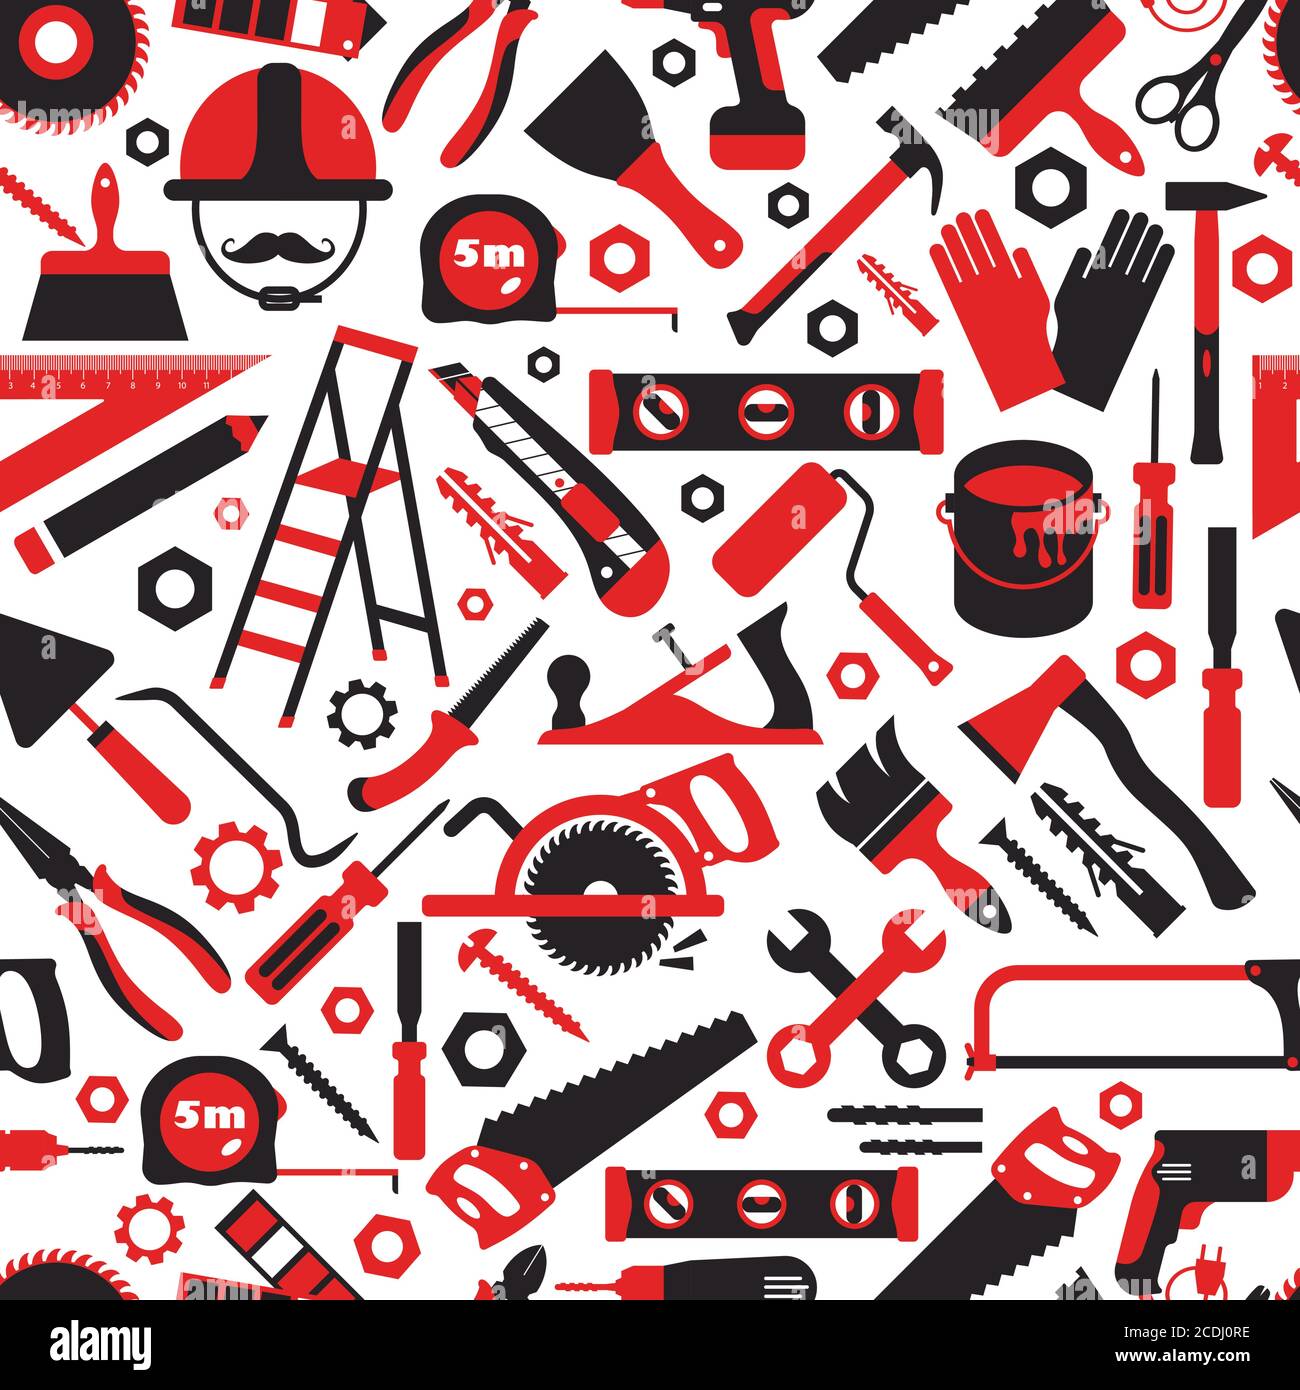 Construction And Repair Tools Seamless Pattern Wallpaper